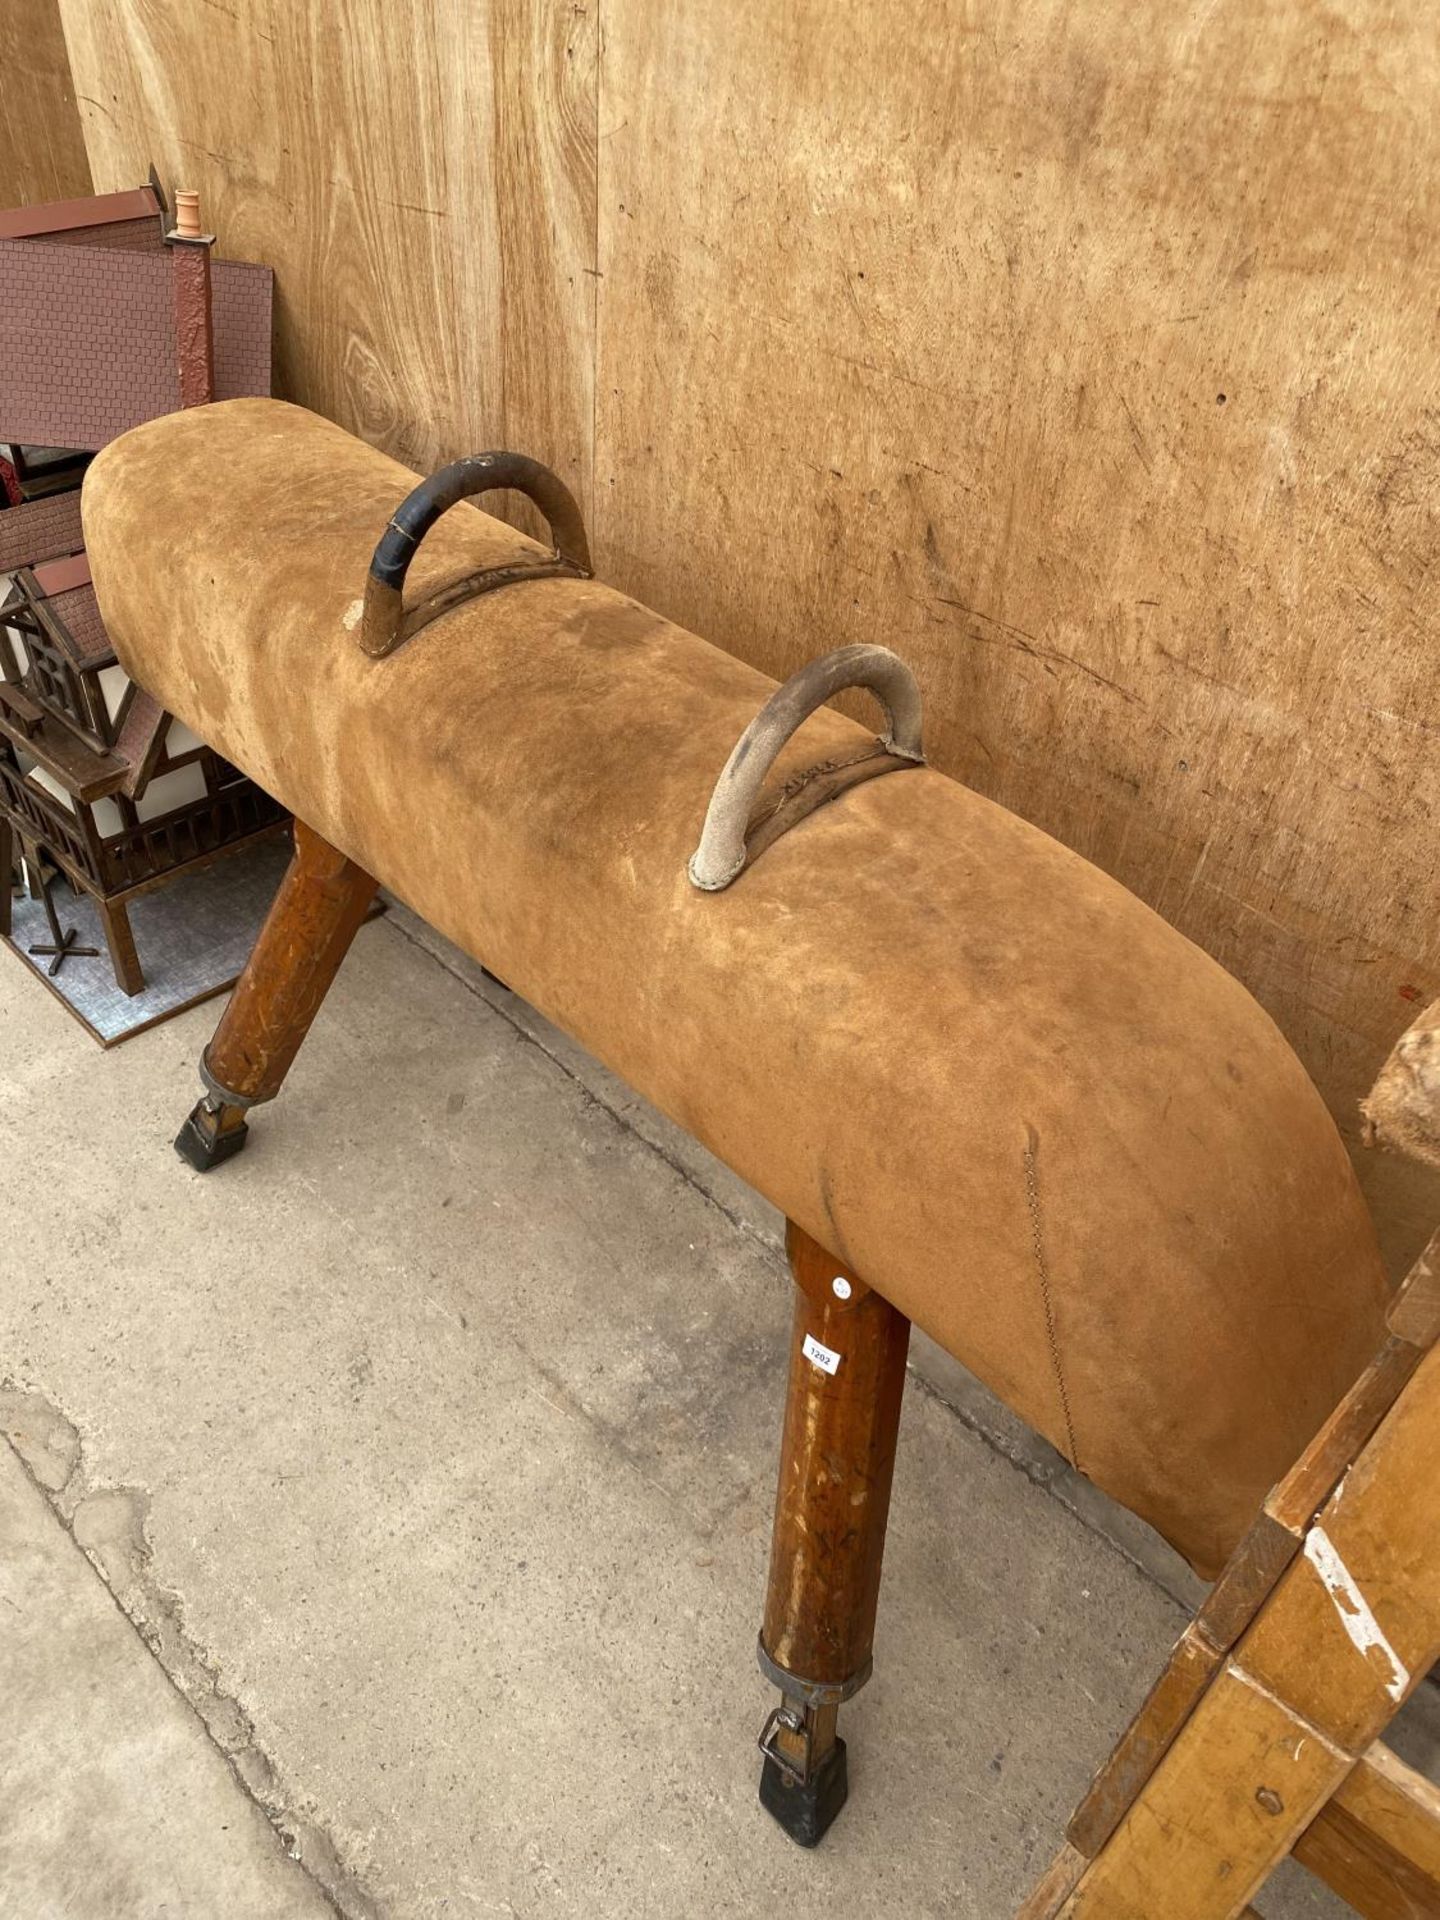 A VINTAGE POMMEL HORSE WITH HOOP BARS, ON FOUR ADJUSTABLE LEGS, 65X24" MAX WITH SUEDE TOP - Image 2 of 4